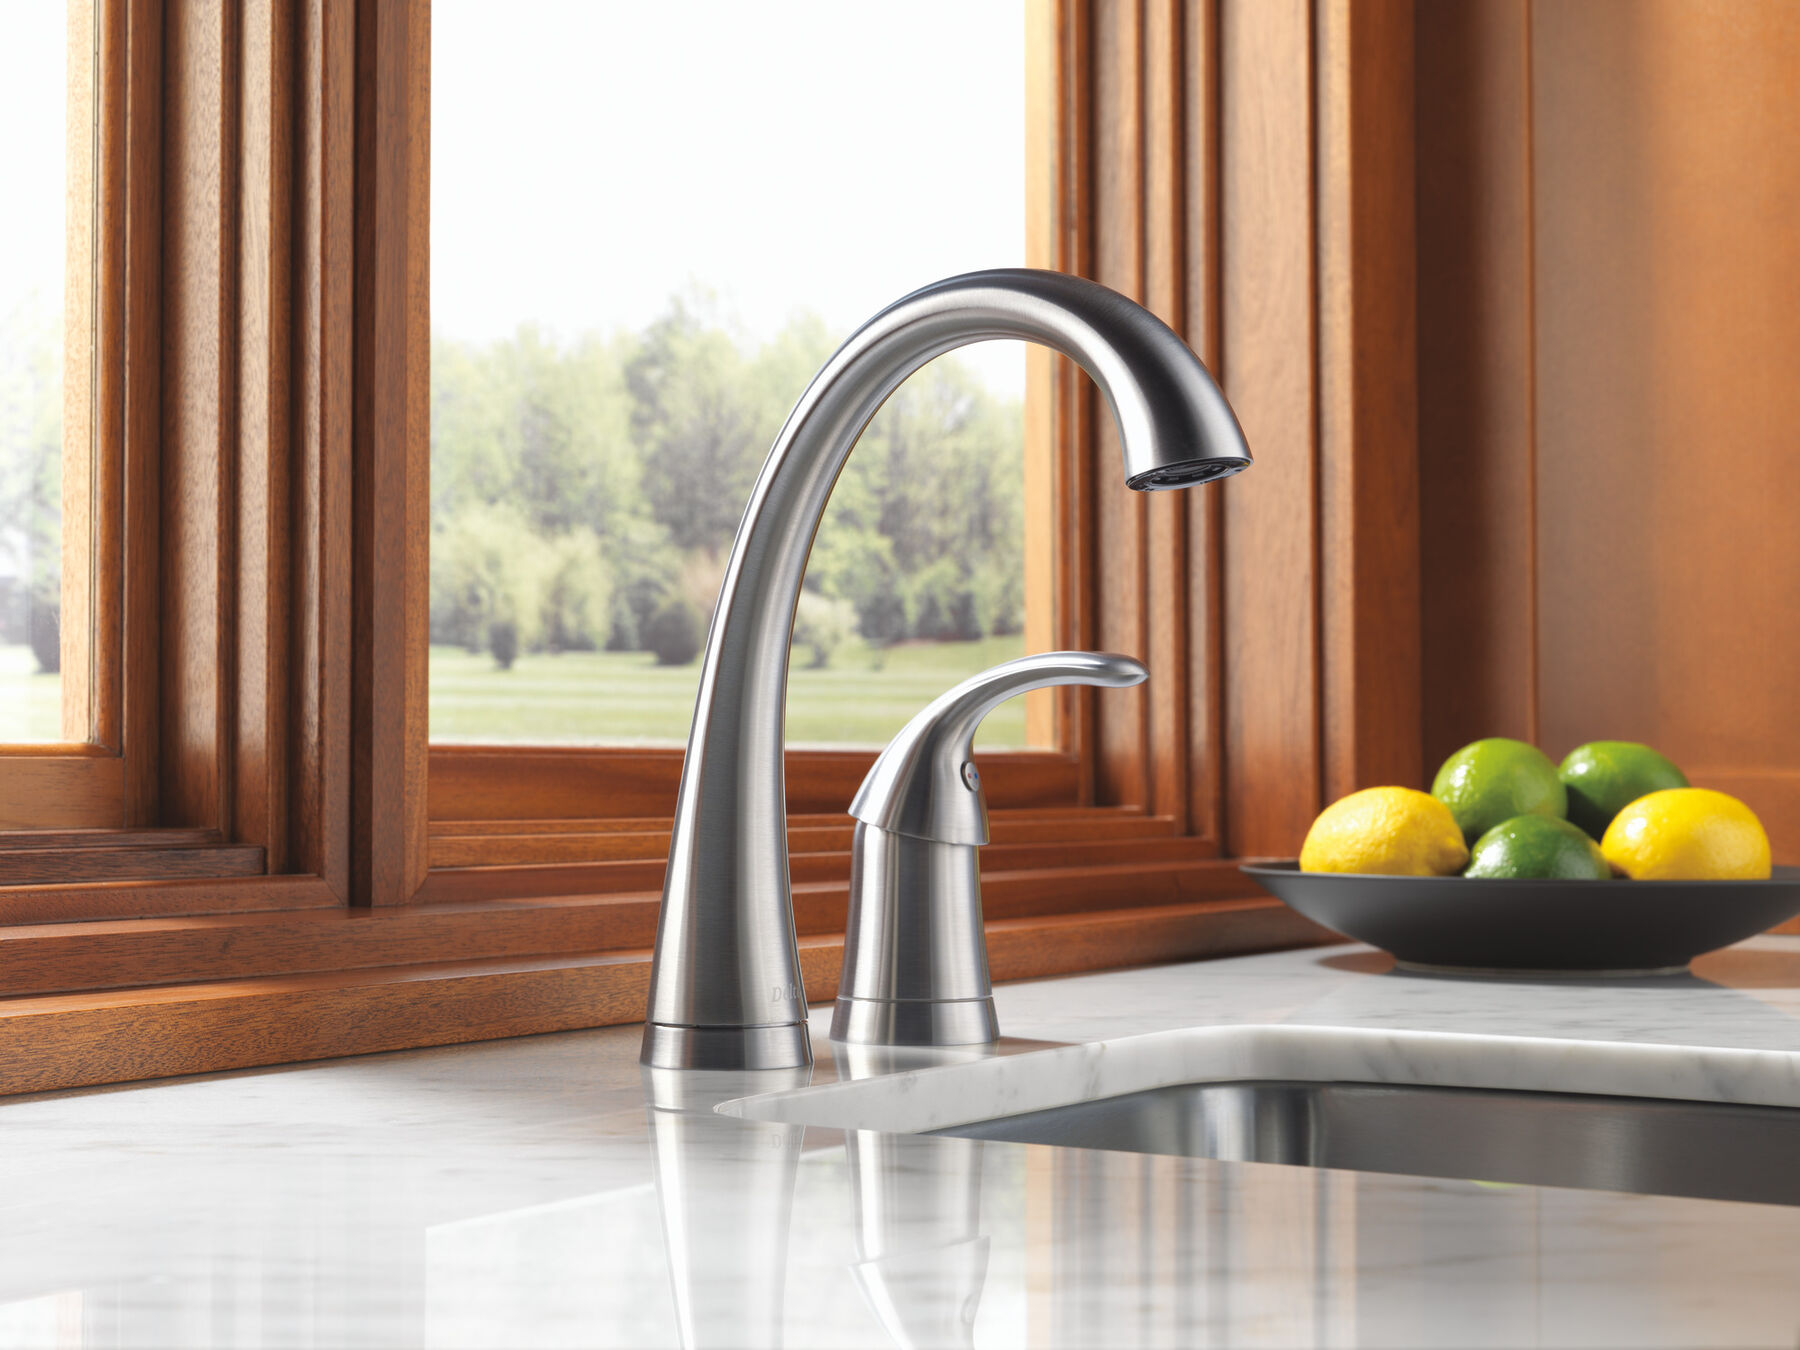 Arctic Stainless 1980 Ar Dst Delta Faucet